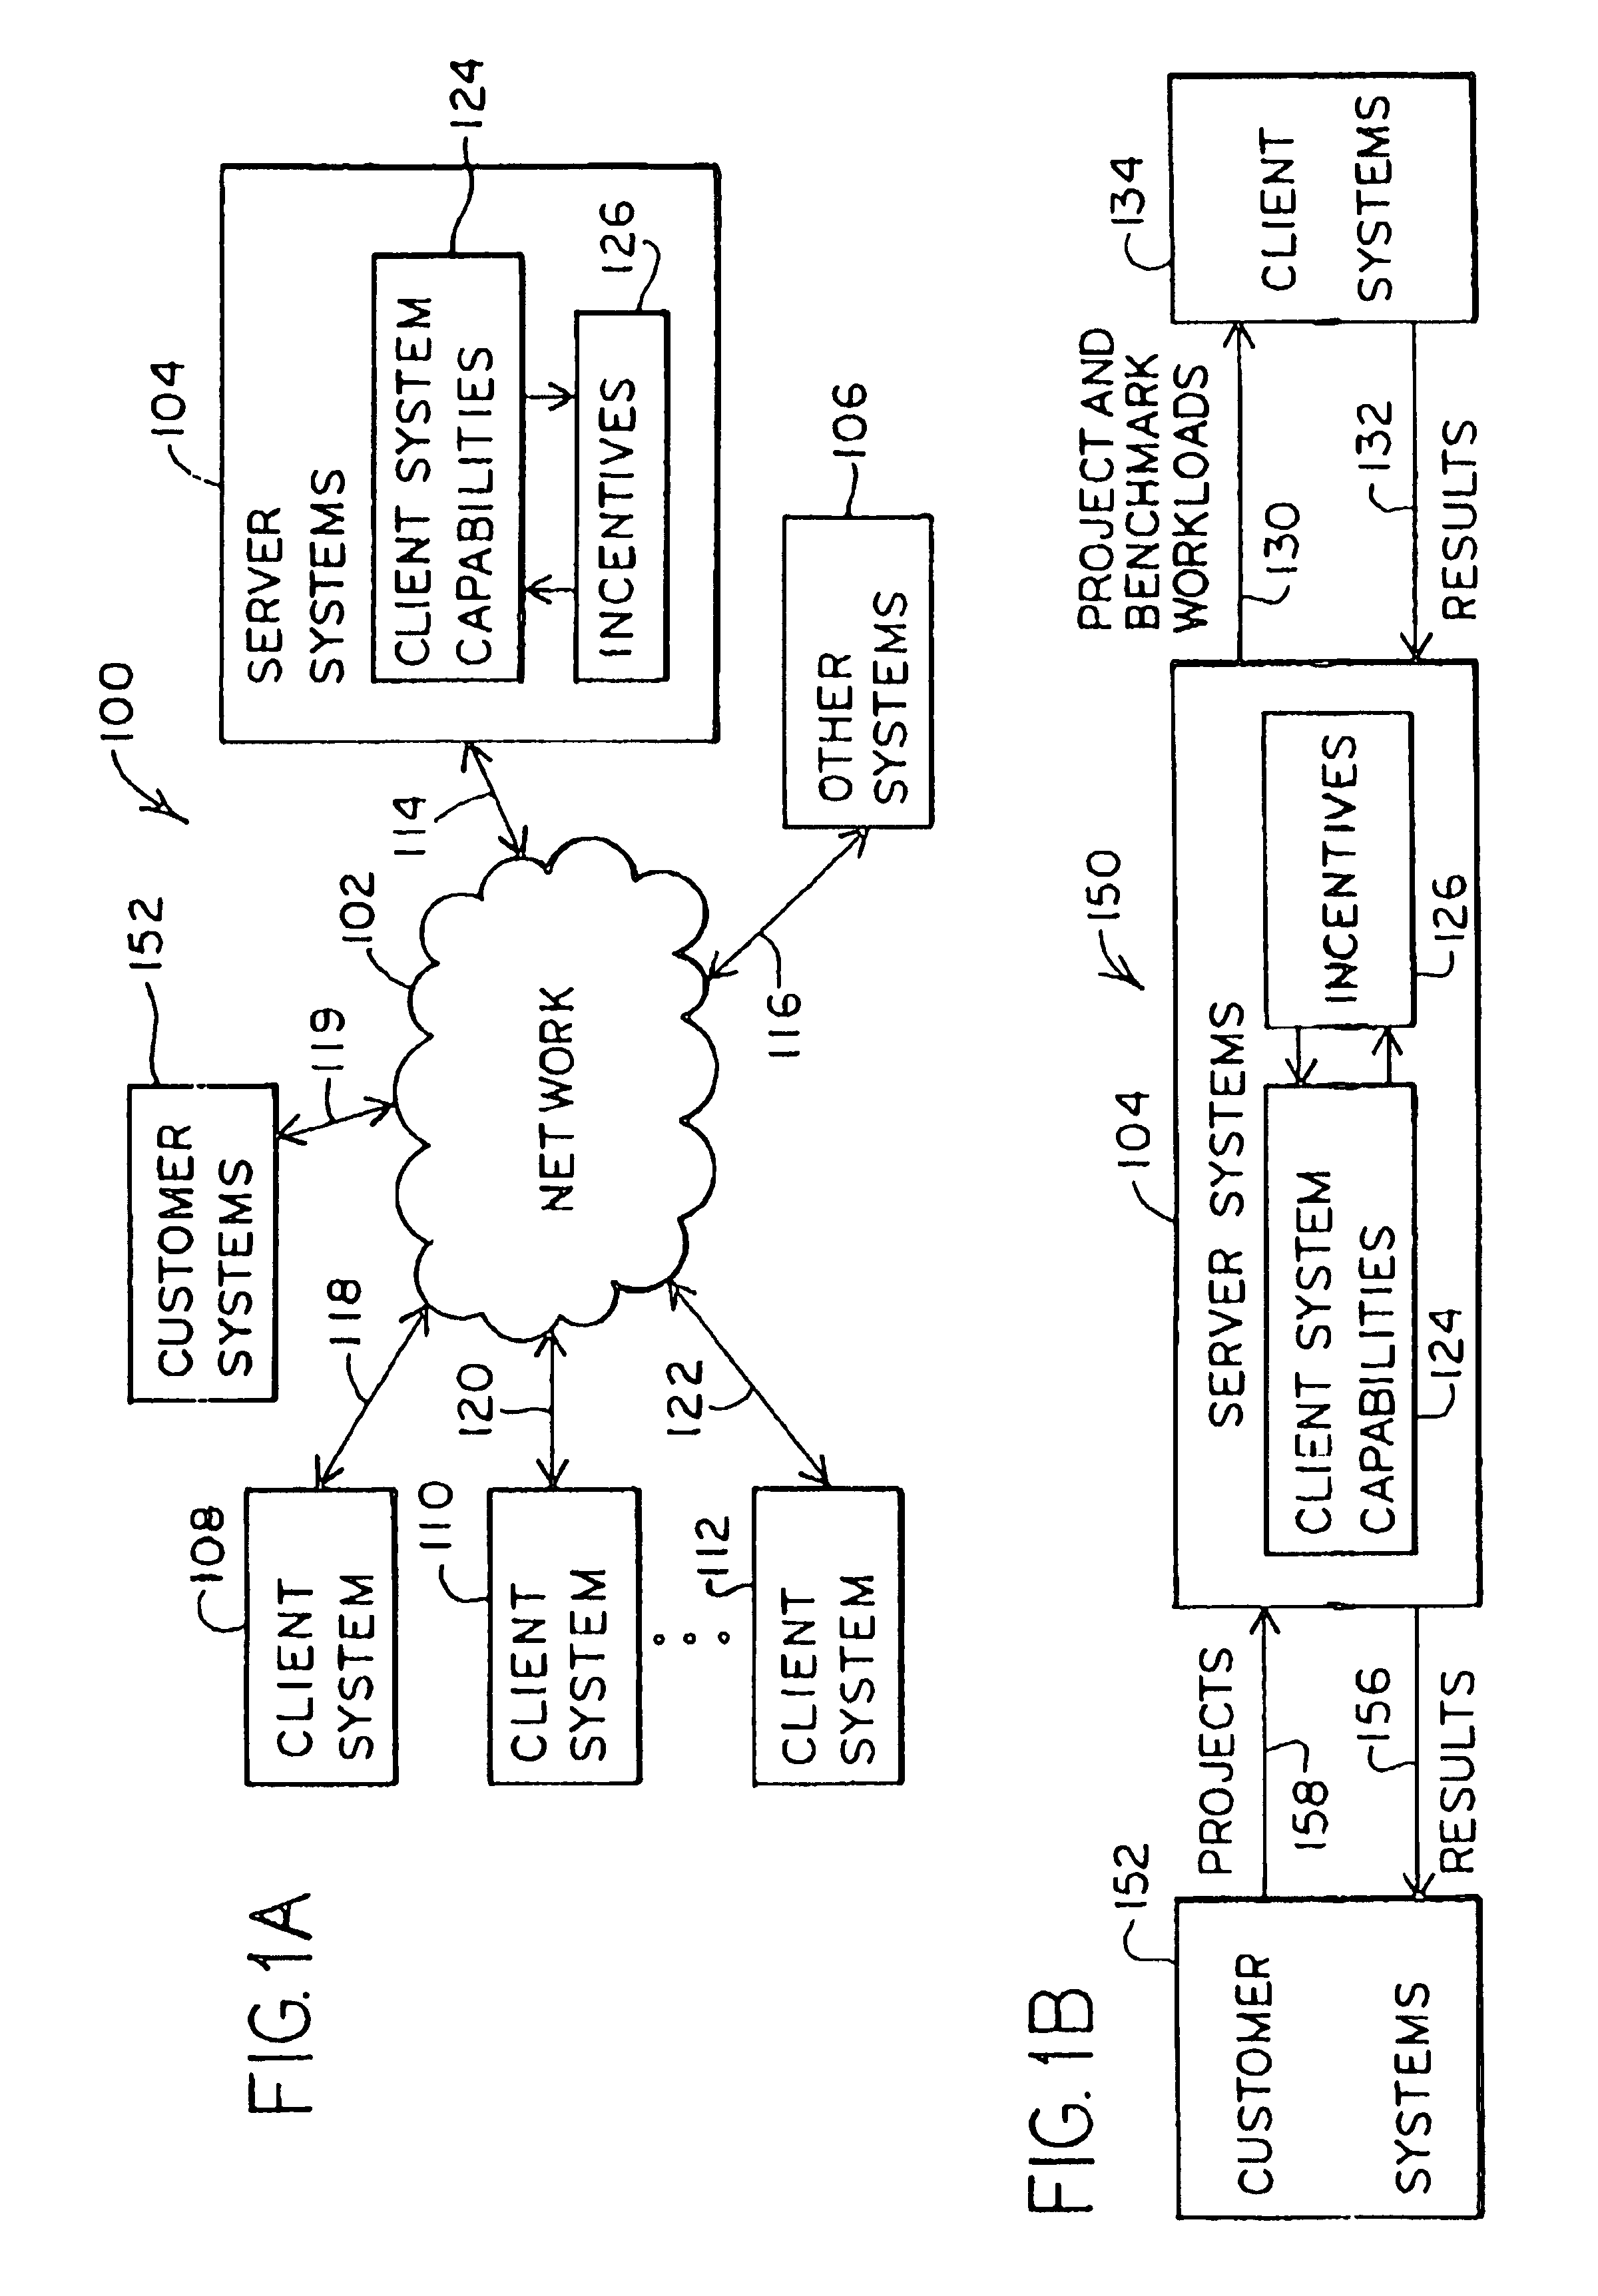 Dynamic coordination and control of network connected devices for large-scale network site testing and associated architectures